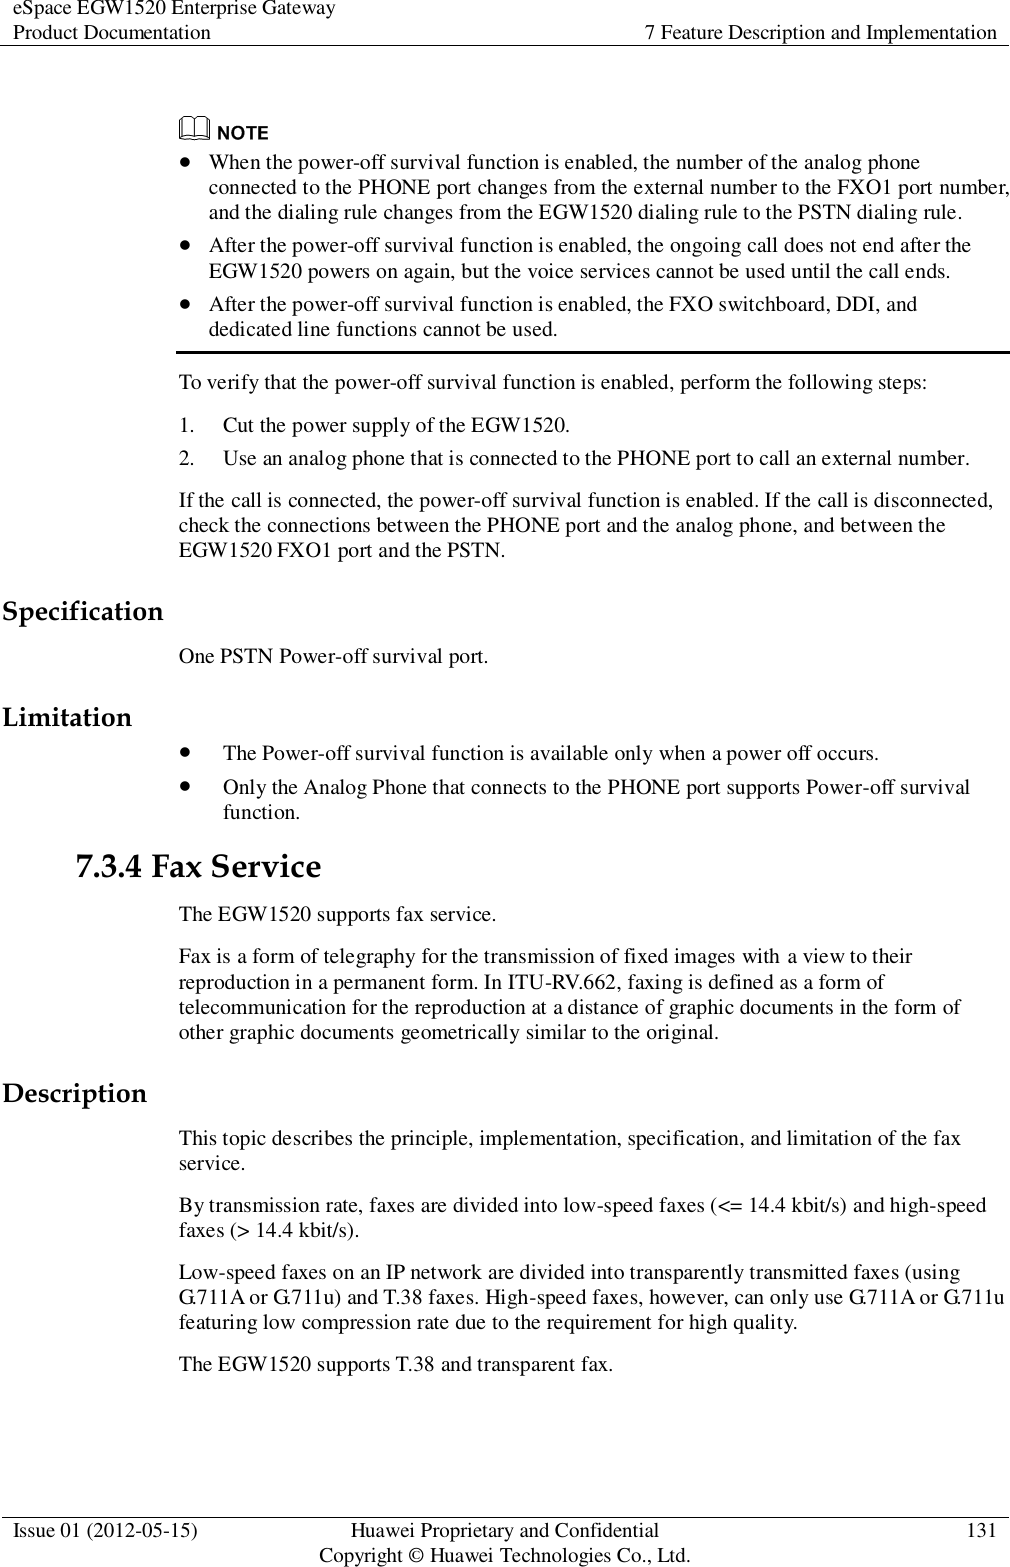 eSpace EGW1520 Enterprise Gateway Product Documentation 7 Feature Description and Implementation  Issue 01 (2012-05-15) Huawei Proprietary and Confidential                                     Copyright © Huawei Technologies Co., Ltd. 131     When the power-off survival function is enabled, the number of the analog phone connected to the PHONE port changes from the external number to the FXO1 port number, and the dialing rule changes from the EGW1520 dialing rule to the PSTN dialing rule.  After the power-off survival function is enabled, the ongoing call does not end after the EGW1520 powers on again, but the voice services cannot be used until the call ends.  After the power-off survival function is enabled, the FXO switchboard, DDI, and dedicated line functions cannot be used. To verify that the power-off survival function is enabled, perform the following steps: 1. Cut the power supply of the EGW1520. 2. Use an analog phone that is connected to the PHONE port to call an external number. If the call is connected, the power-off survival function is enabled. If the call is disconnected, check the connections between the PHONE port and the analog phone, and between the EGW1520 FXO1 port and the PSTN. Specification One PSTN Power-off survival port. Limitation  The Power-off survival function is available only when a power off occurs.  Only the Analog Phone that connects to the PHONE port supports Power-off survival function. 7.3.4 Fax Service The EGW1520 supports fax service. Fax is a form of telegraphy for the transmission of fixed images with a view to their reproduction in a permanent form. In ITU-RV.662, faxing is defined as a form of telecommunication for the reproduction at a distance of graphic documents in the form of other graphic documents geometrically similar to the original. Description This topic describes the principle, implementation, specification, and limitation of the fax service. By transmission rate, faxes are divided into low-speed faxes (&lt;= 14.4 kbit/s) and high-speed faxes (&gt; 14.4 kbit/s). Low-speed faxes on an IP network are divided into transparently transmitted faxes (using G.711A or G.711u) and T.38 faxes. High-speed faxes, however, can only use G.711A or G.711u featuring low compression rate due to the requirement for high quality. The EGW1520 supports T.38 and transparent fax. 